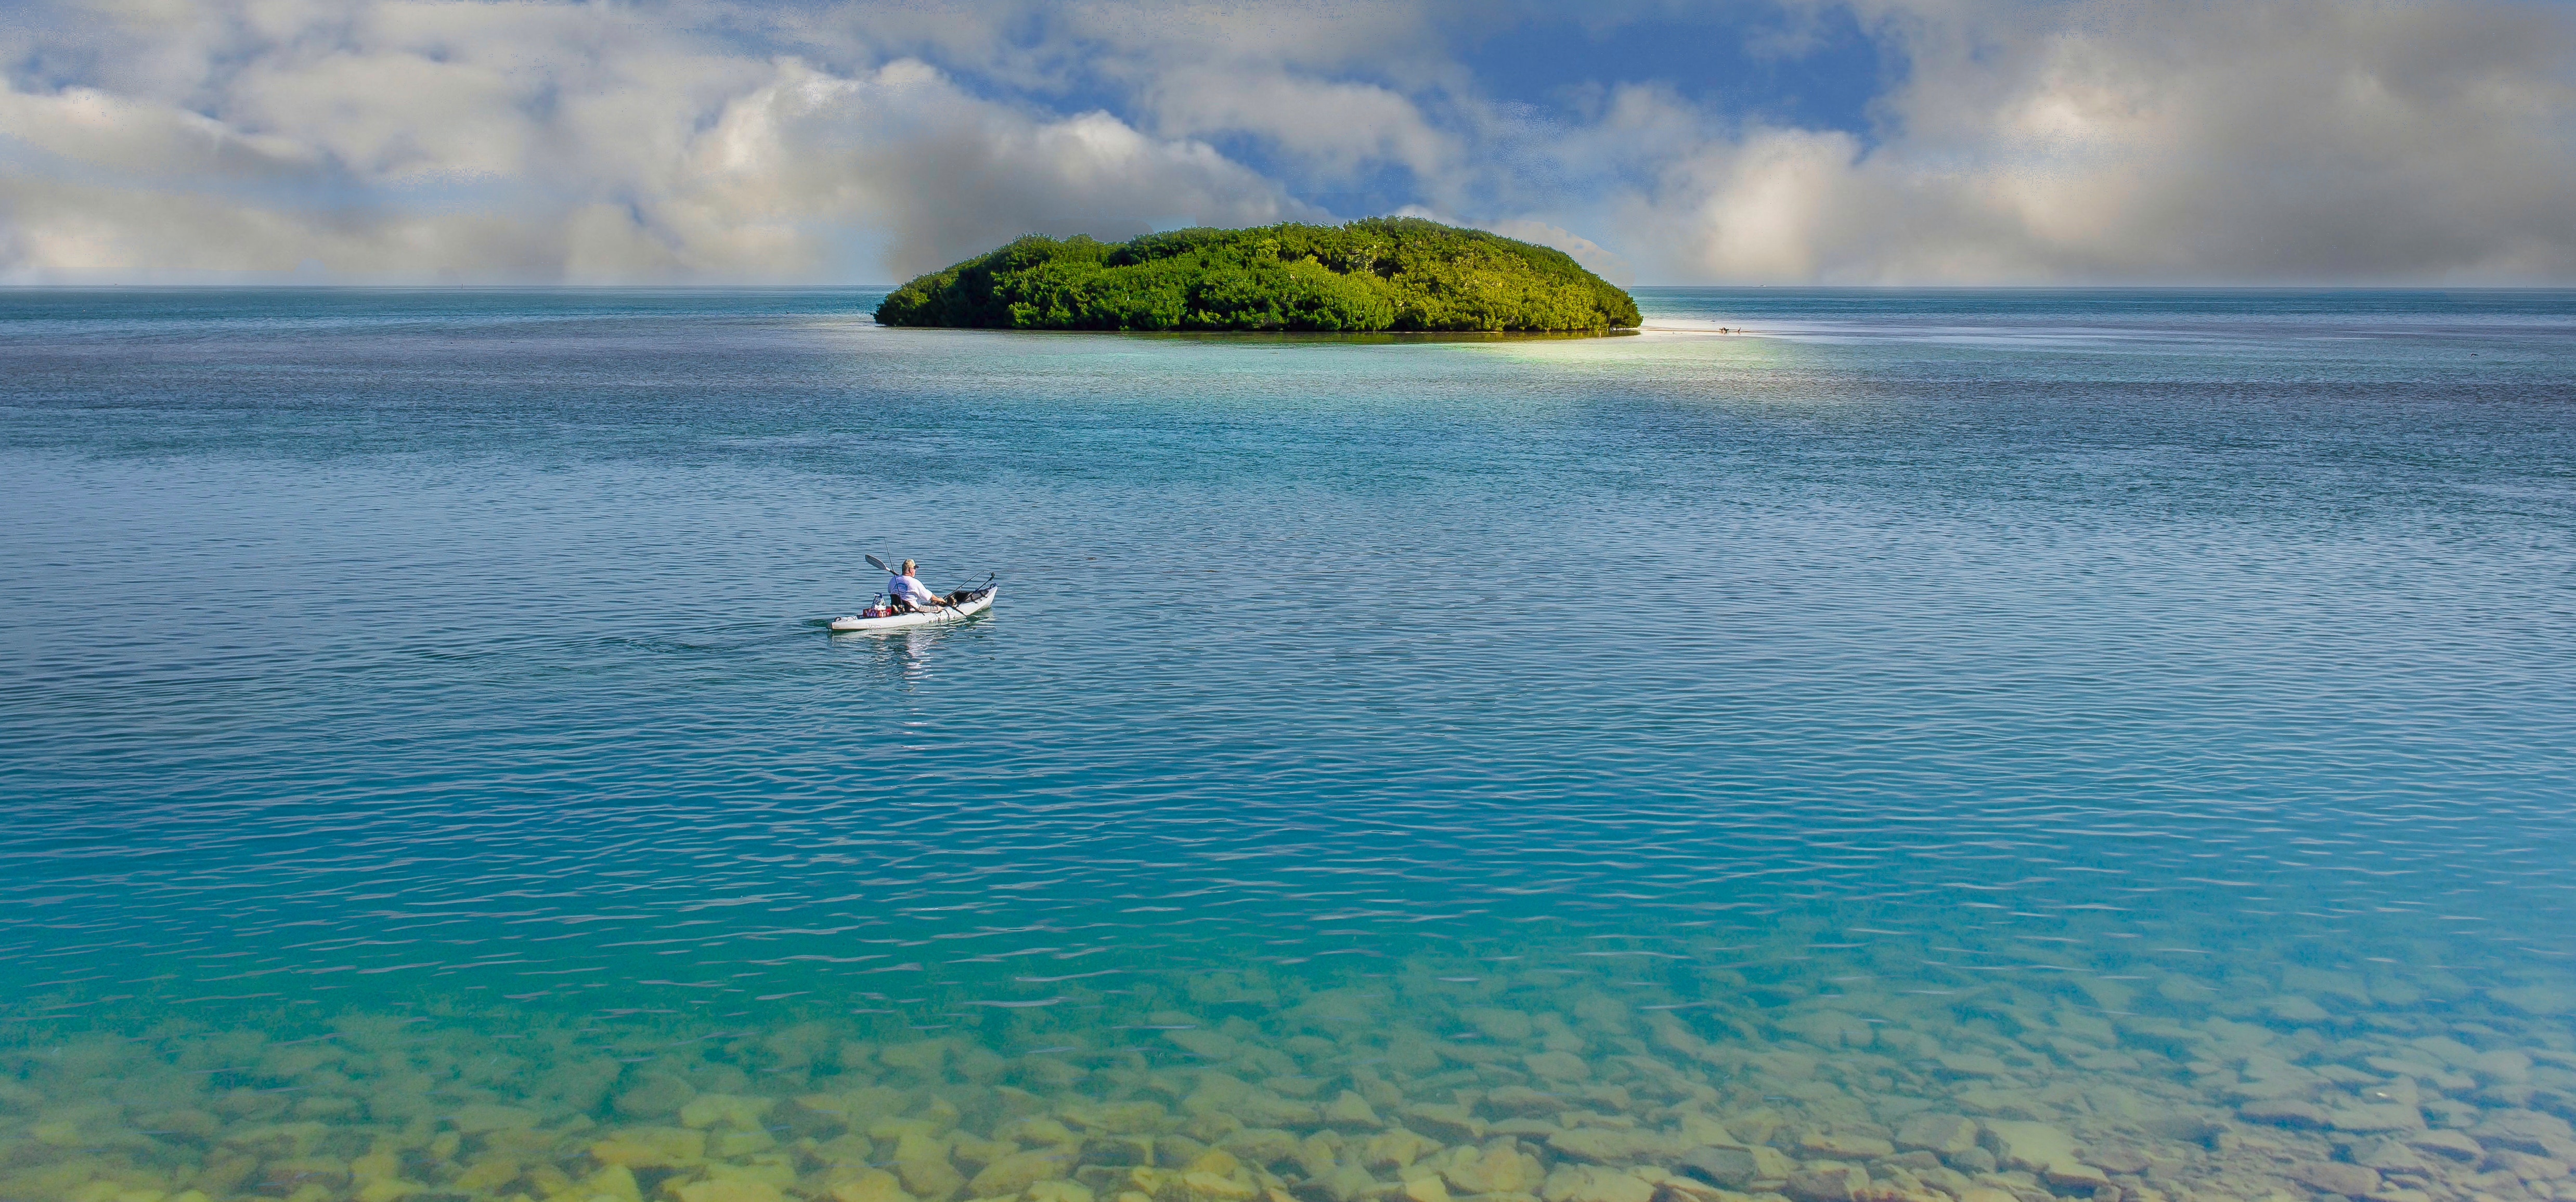 A lone kayaker paddles out to a remote island.